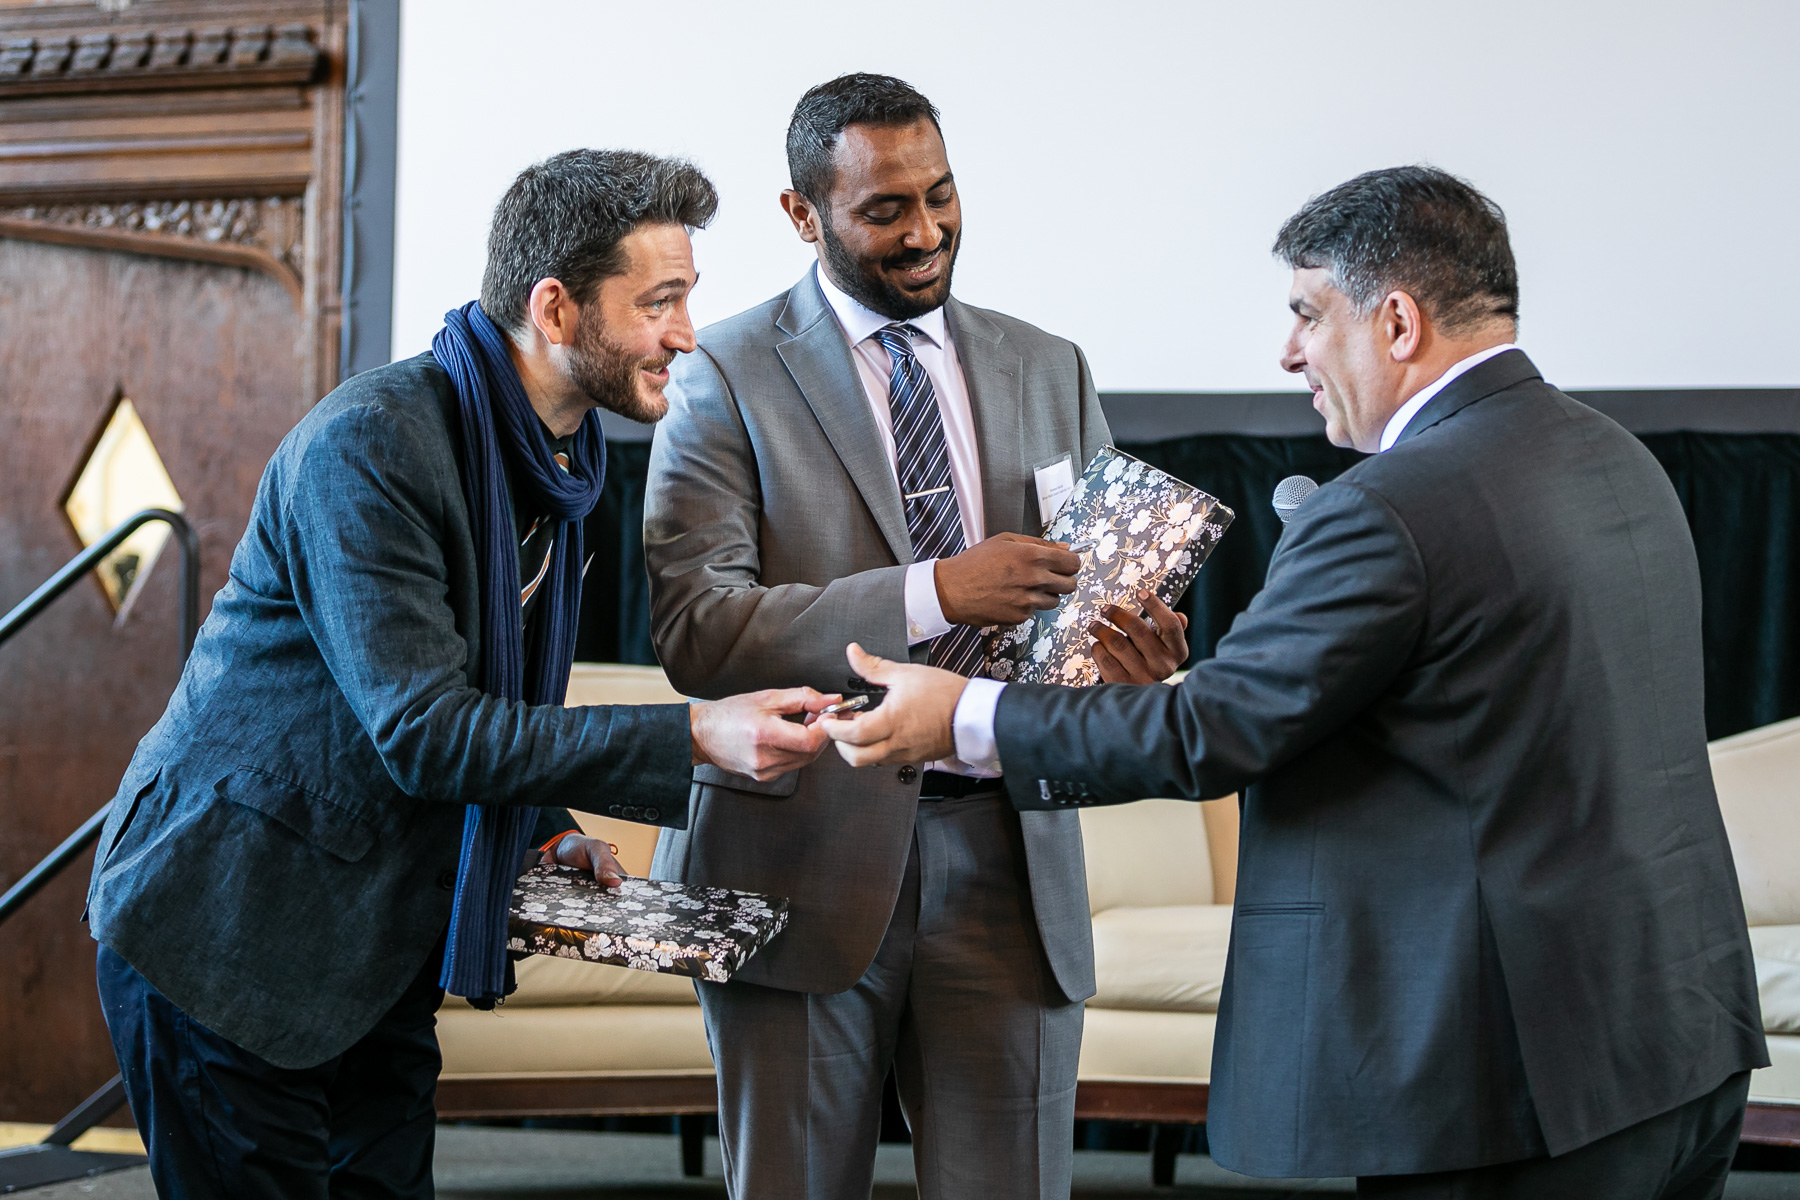 Sichrovsky and Abubakr received DePaul’s Shared Coin from President Manuel at the conclusion of the event.